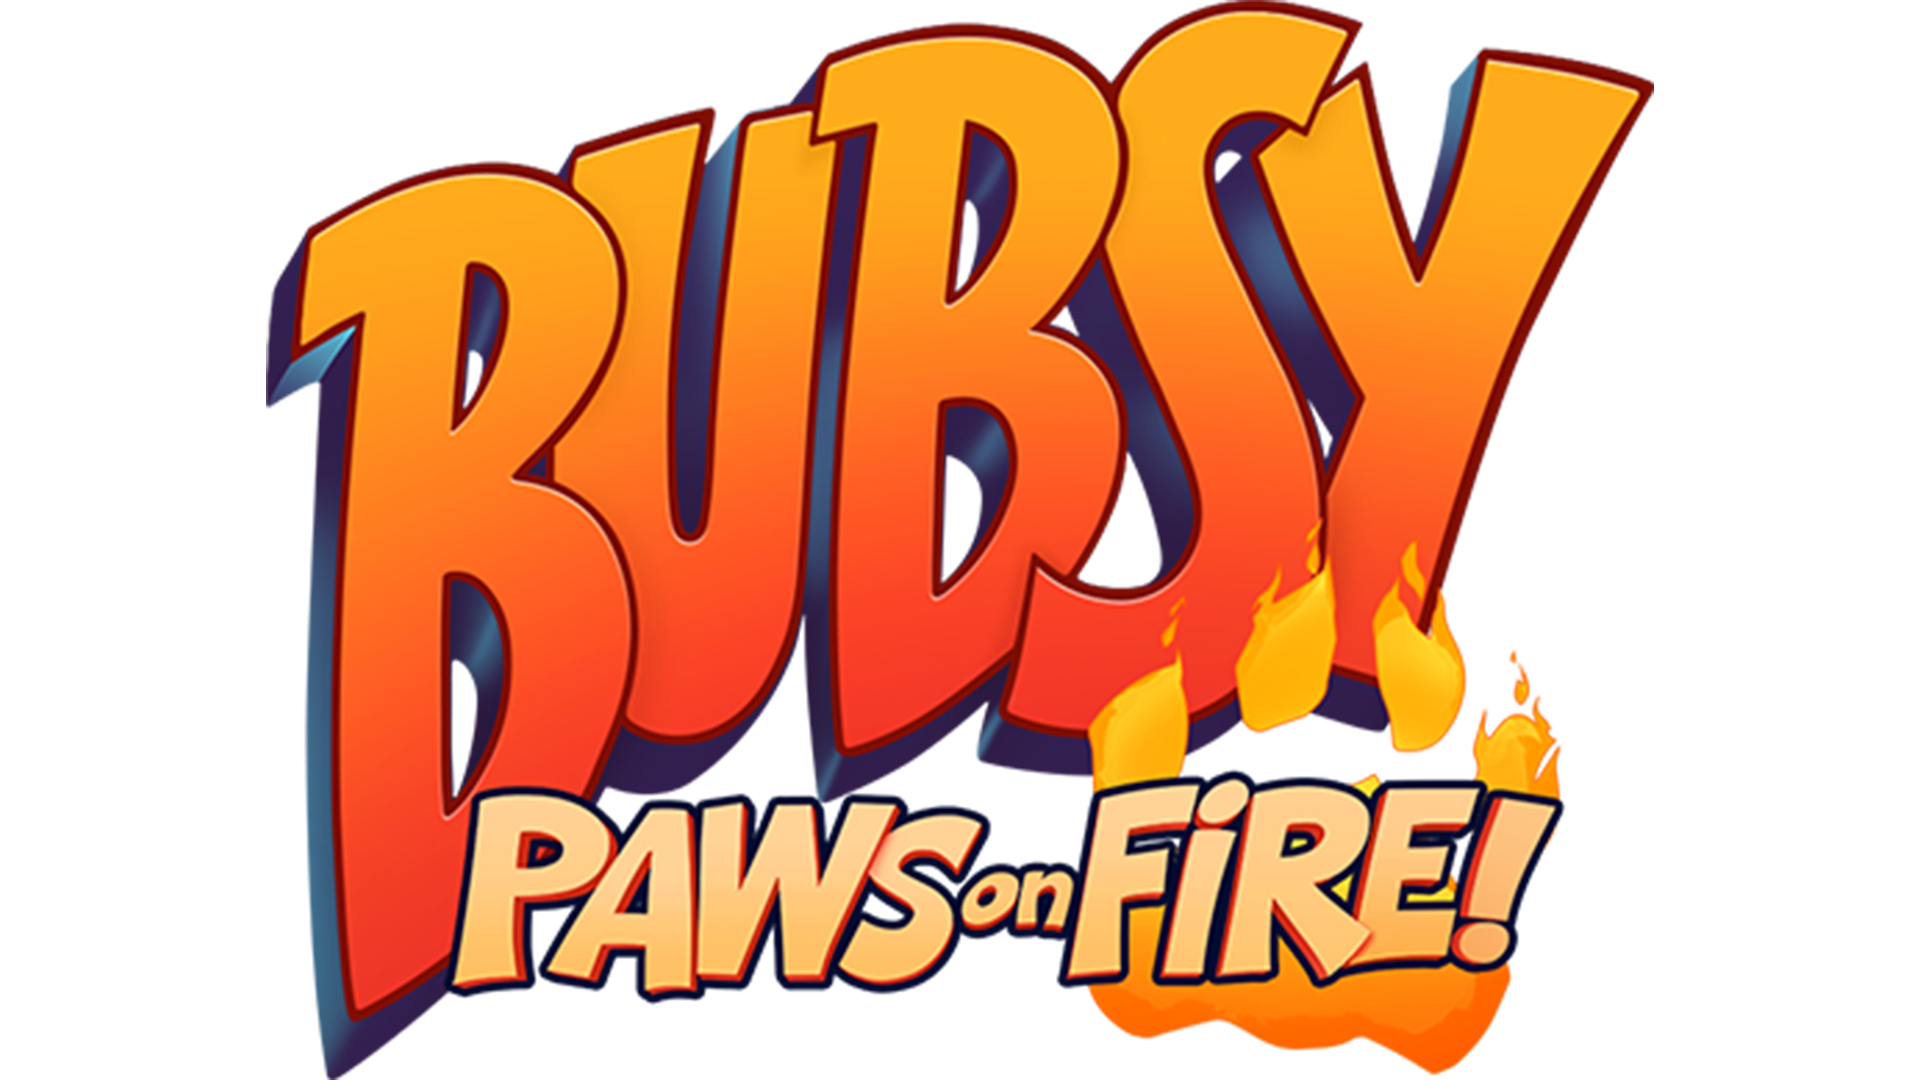 Bubsy: Paws on Fire! Logo